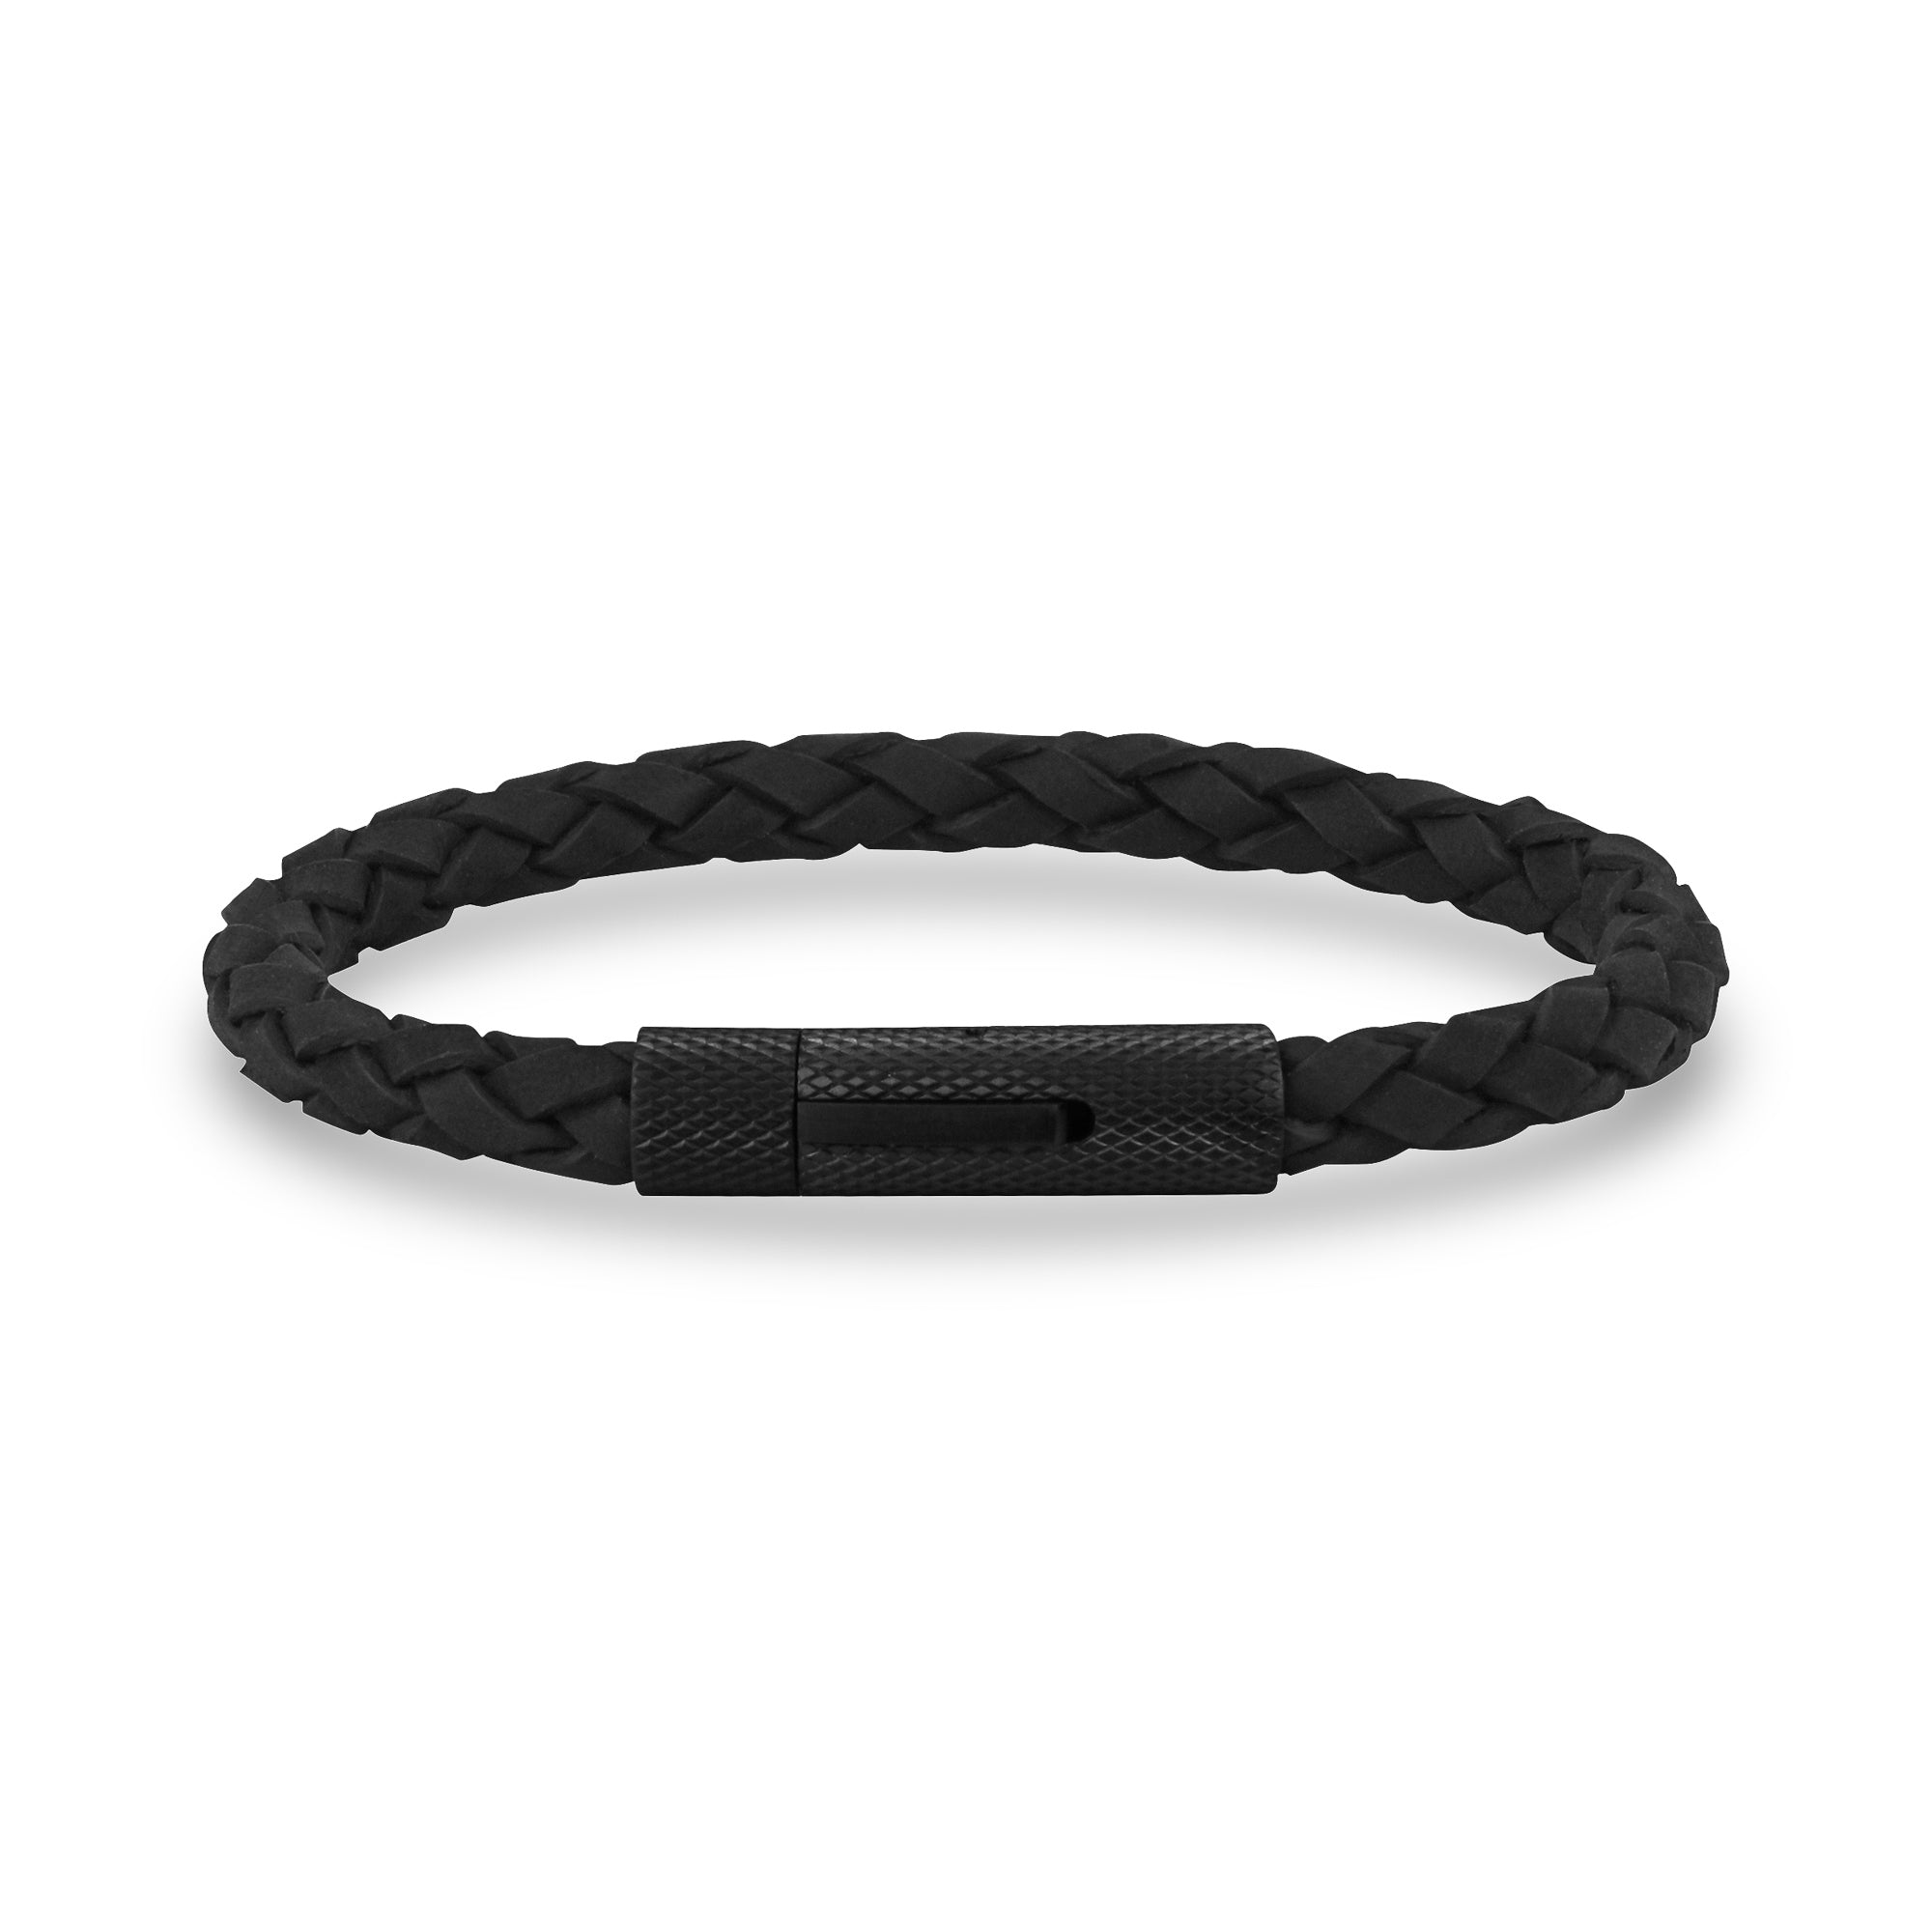 Buy THE MEN THING ADRONIX BLACK - Leather Bracelet, Leather Multi-Layer  Bracelet with Stainless Steel Magnetic Buckle for Men & Boys (8inch) at  Amazon.in